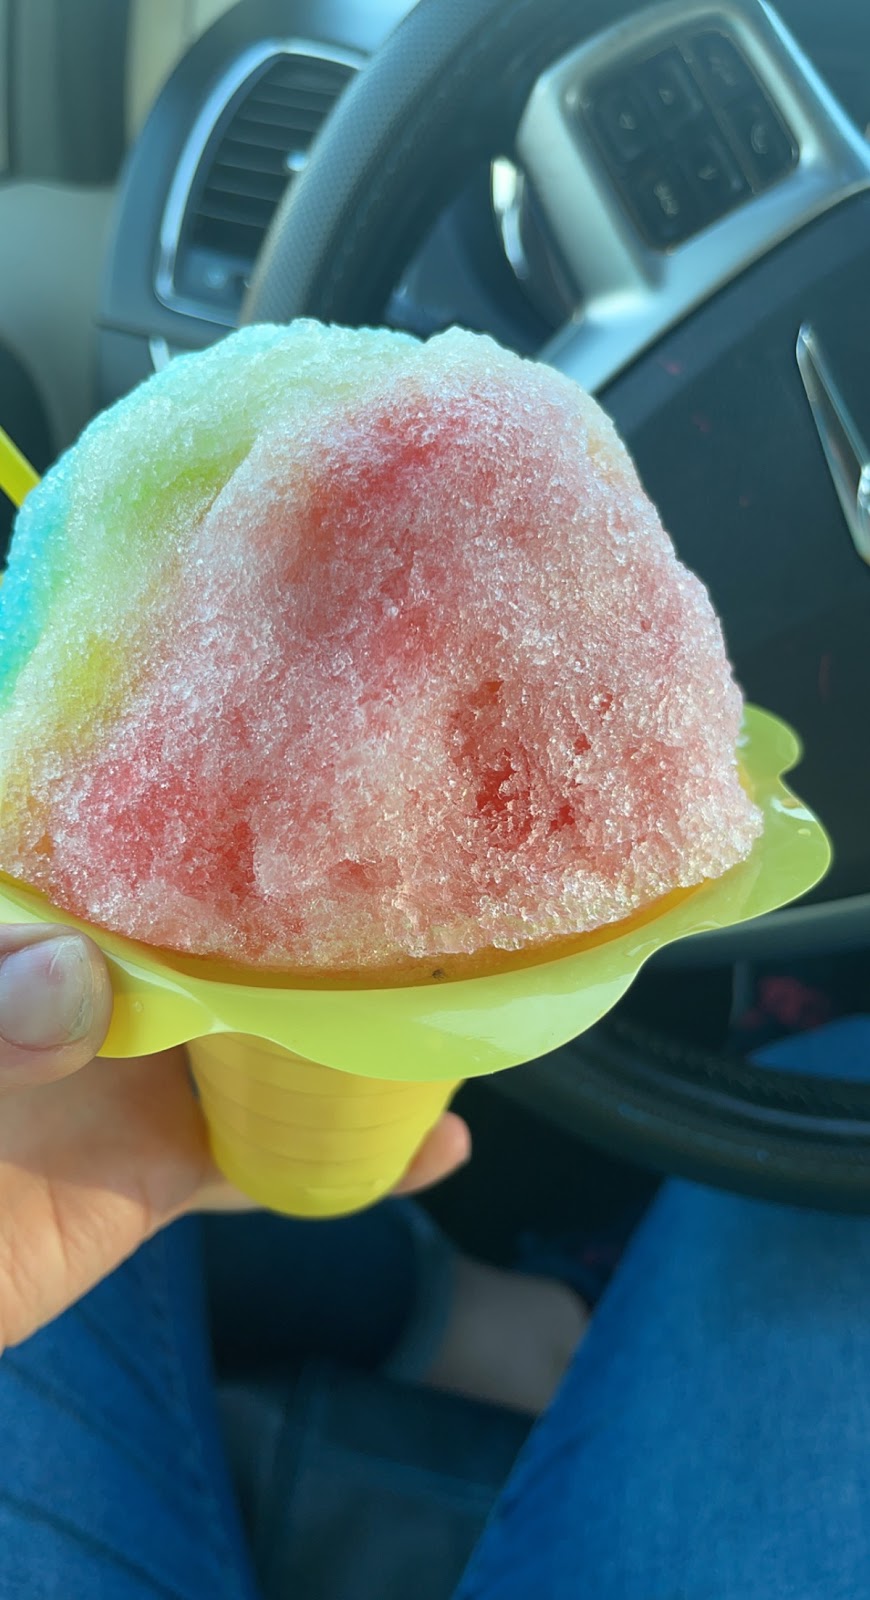 Lizzy Lous Shaved Ice | 5850 Highway N, Cottleville, MO 63304 | Phone: (913) 907-0504